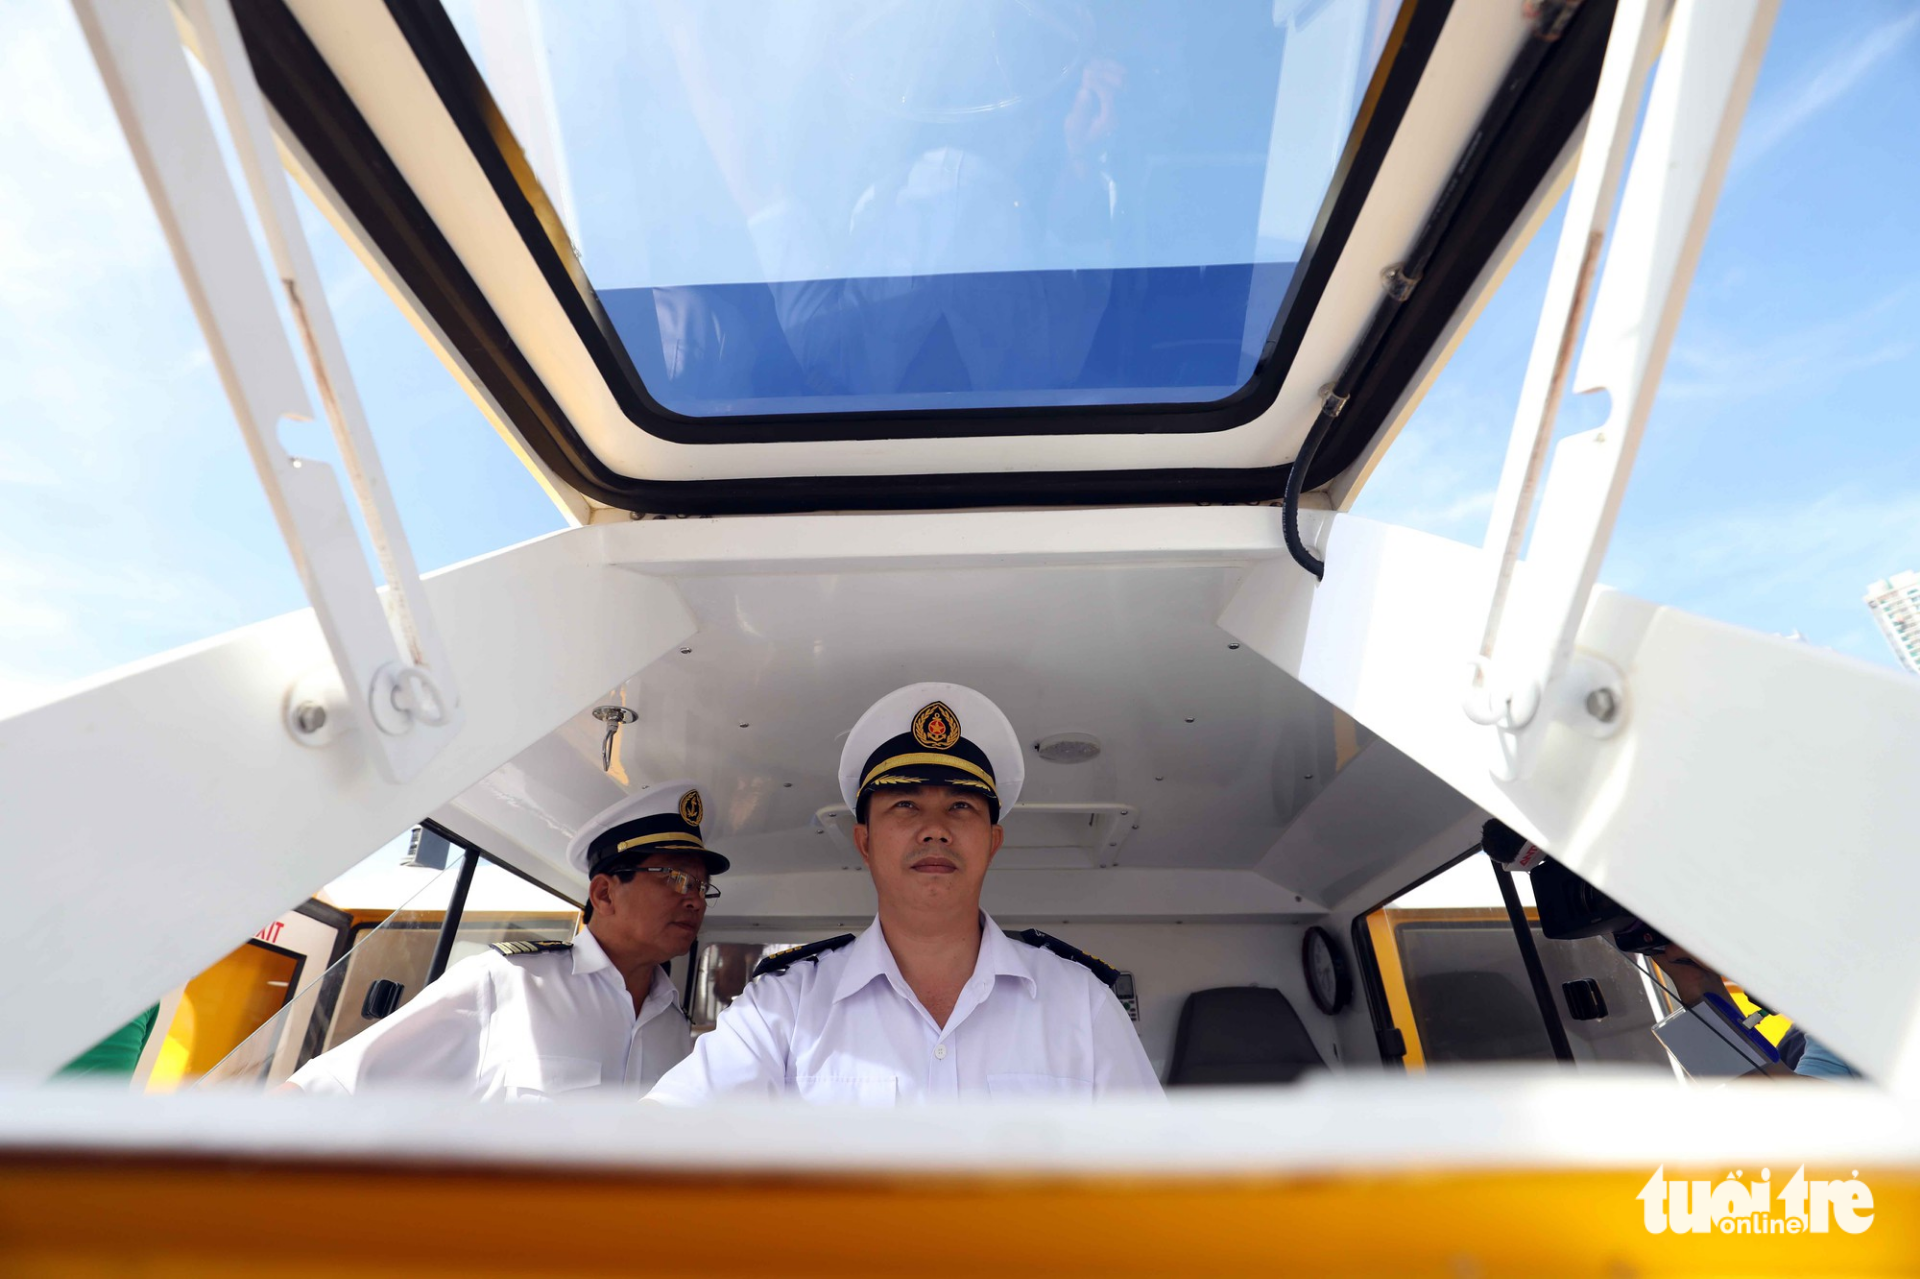 A captain steers the boat along the route No. 1.